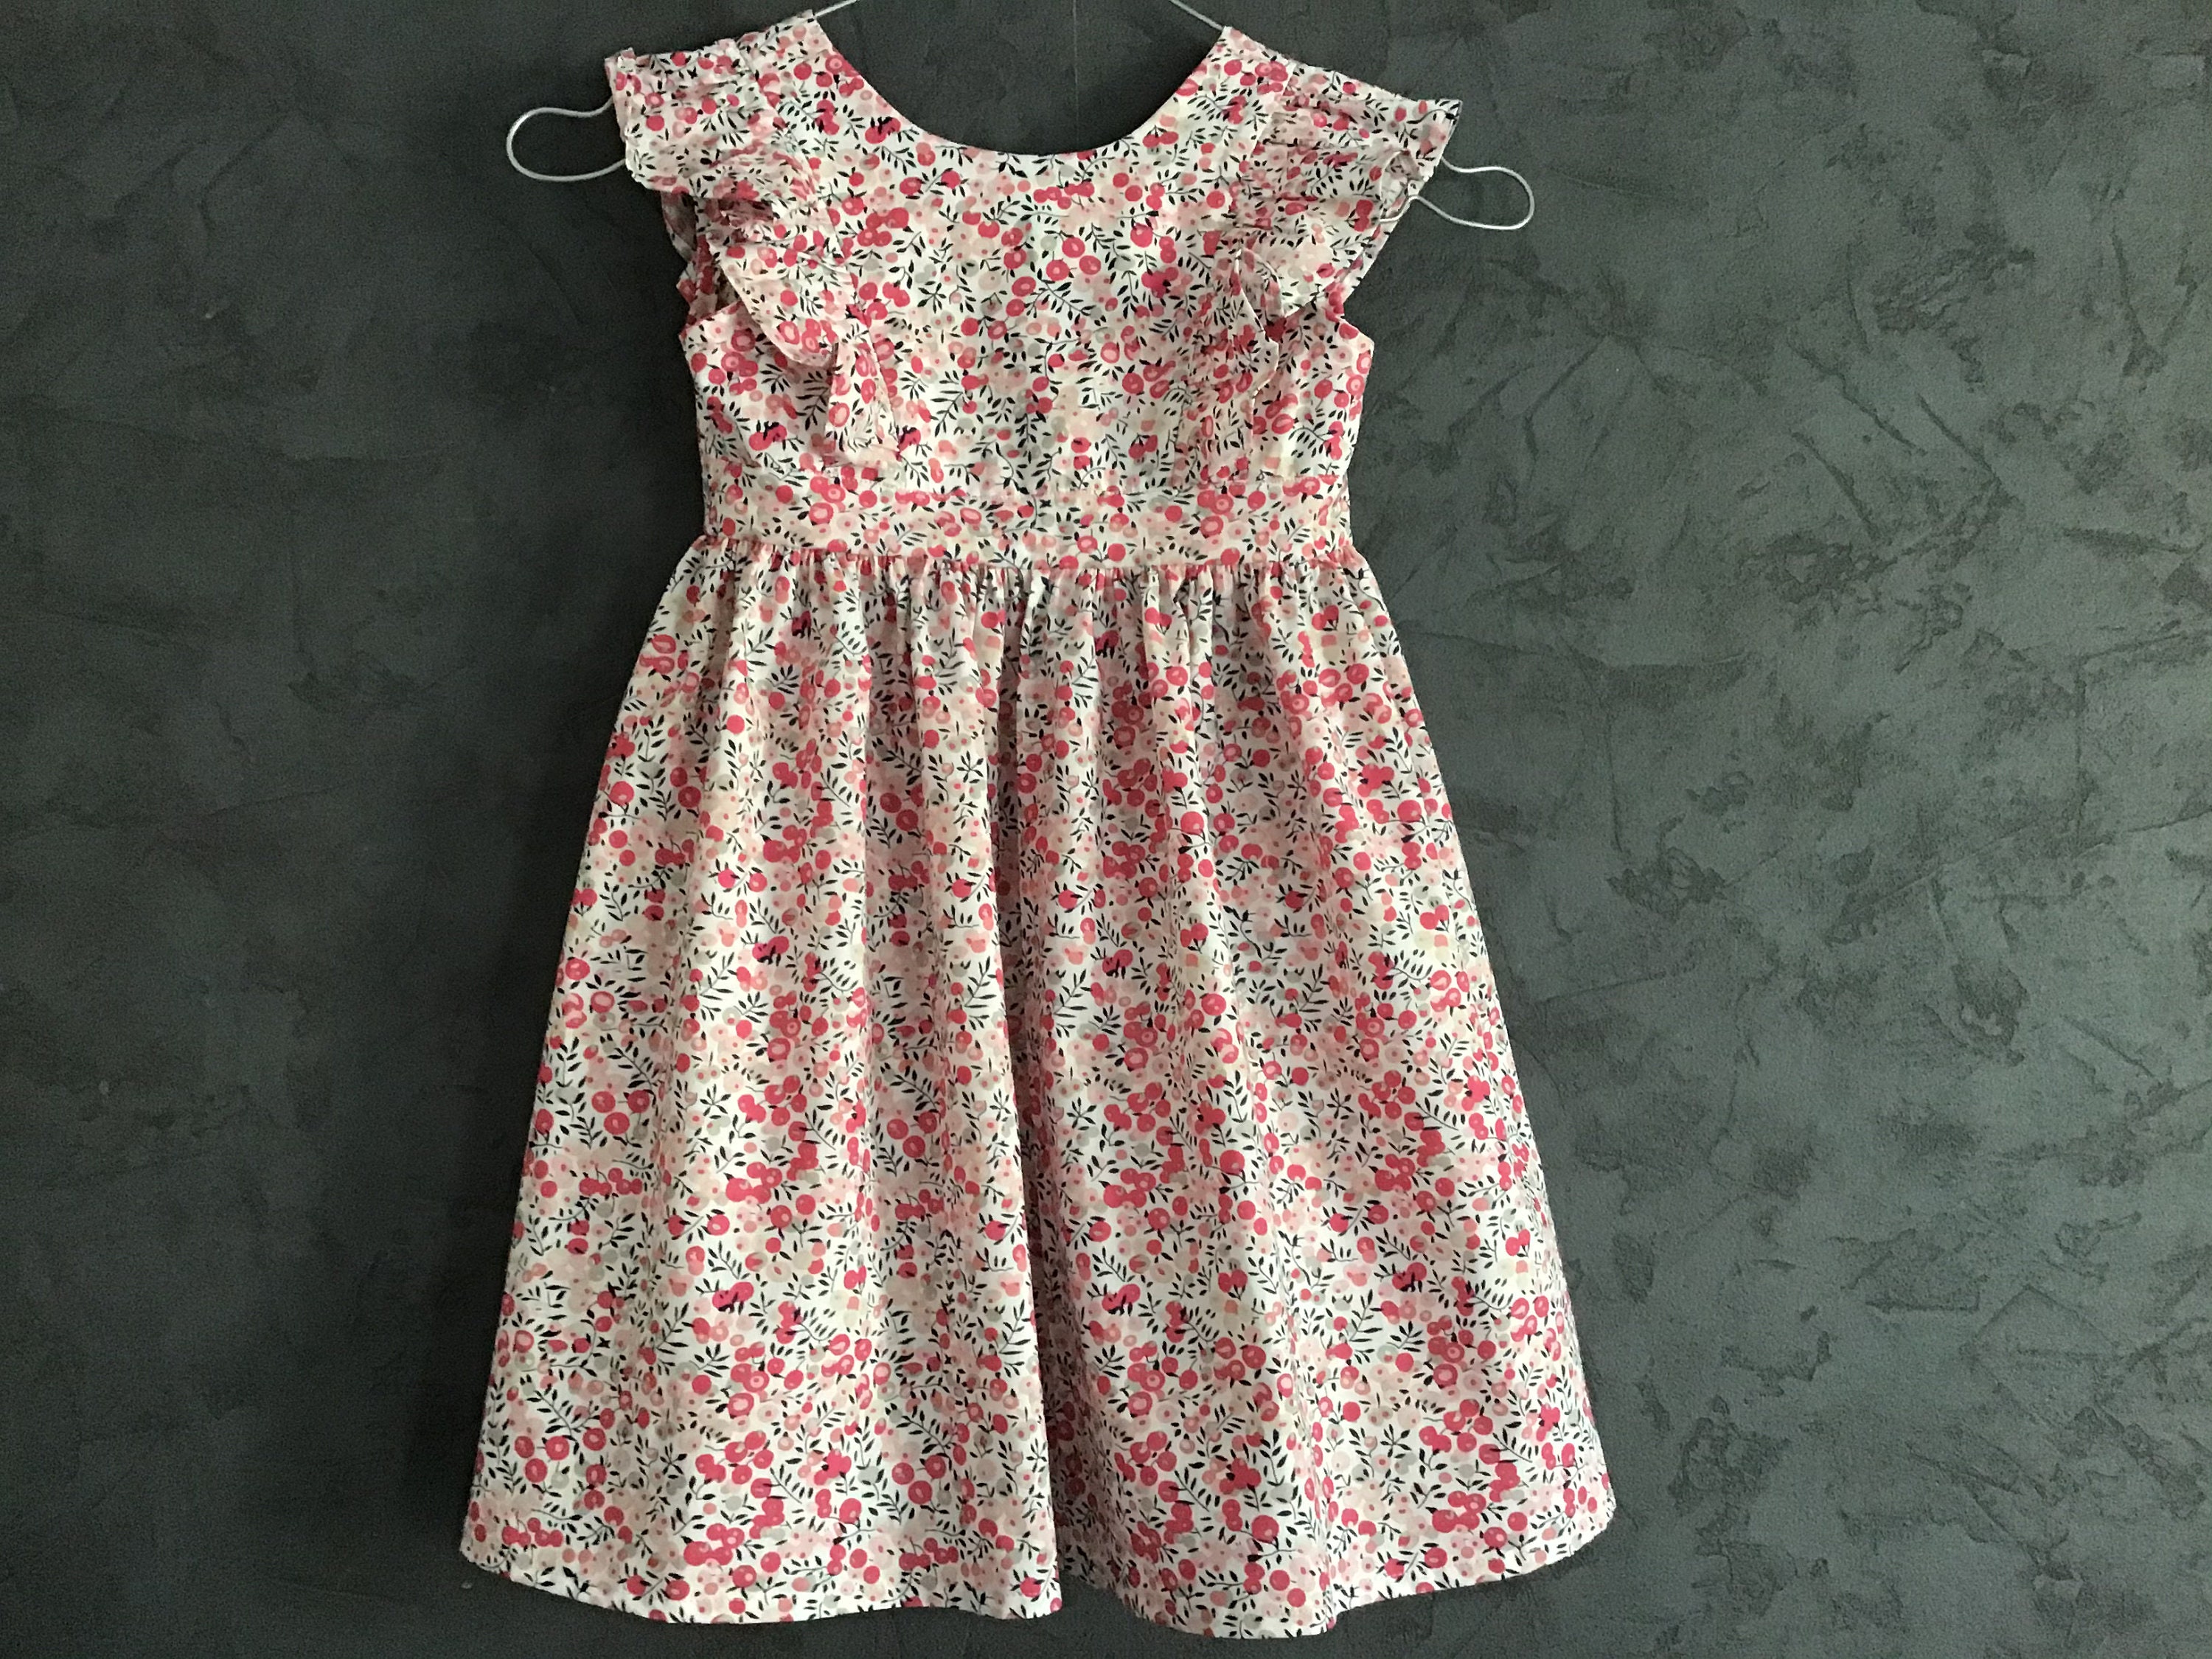 Spring ruffle dress with bare back from 2 to 12 years | Etsy